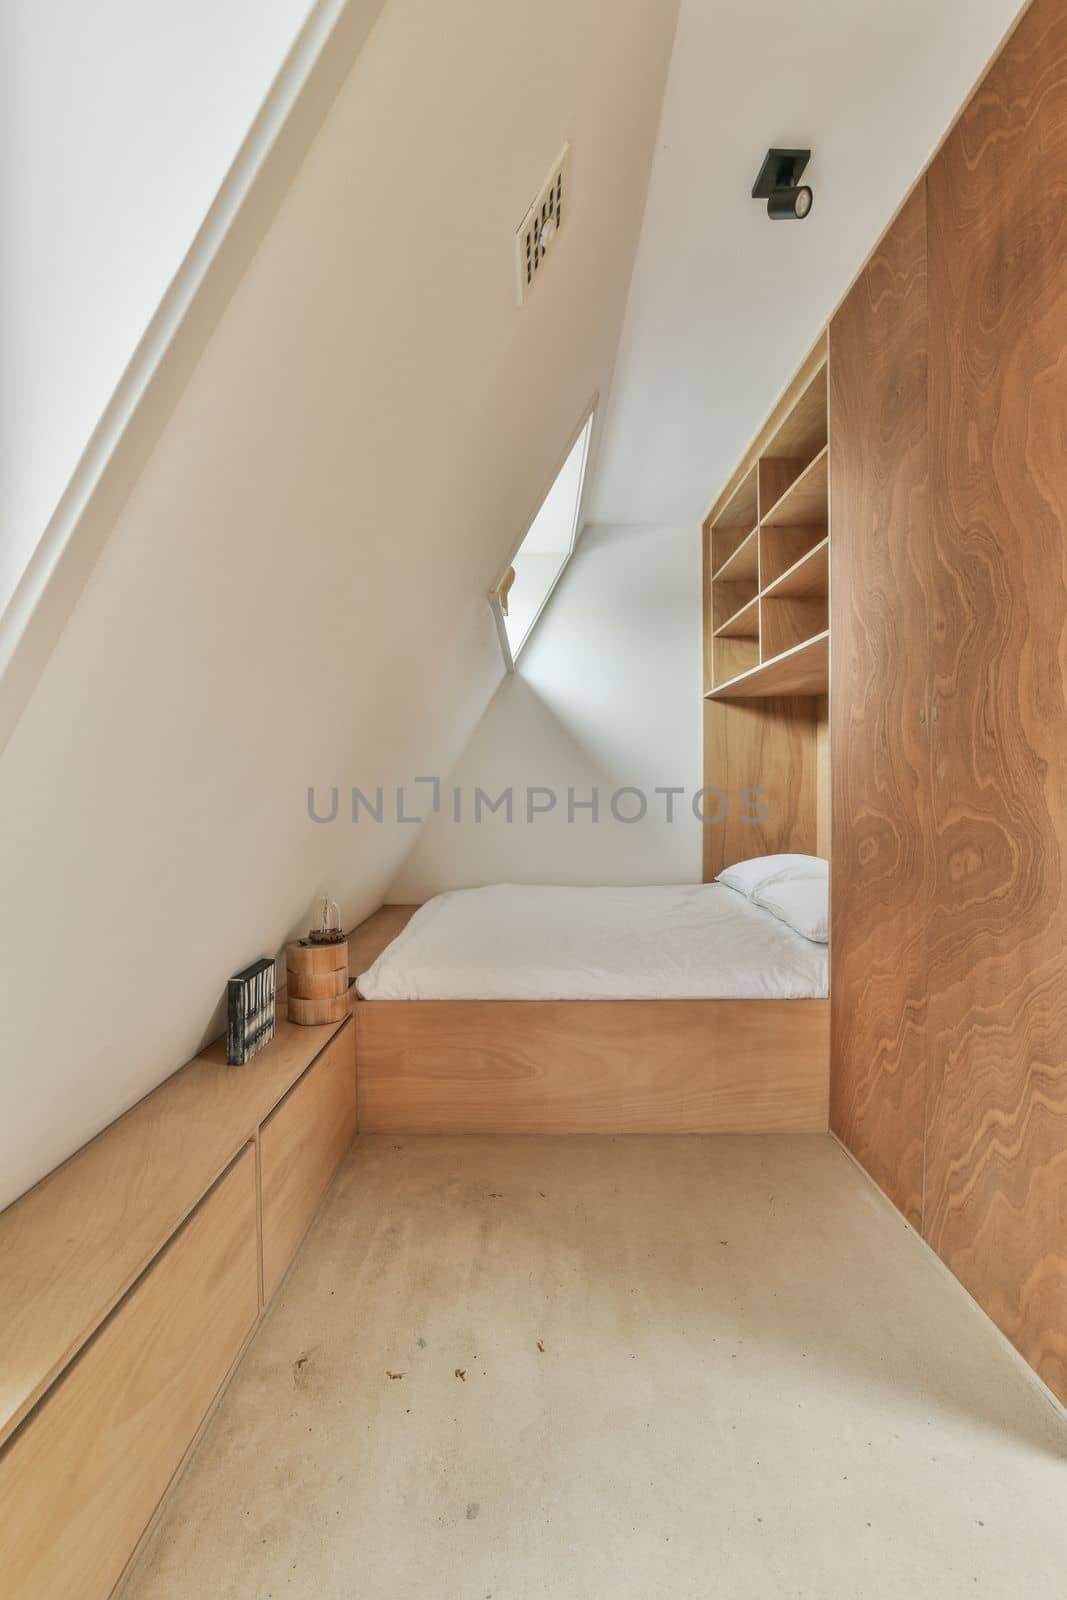 a bedroom with a bed and cupboards on the wall next to each other room in an attic style home